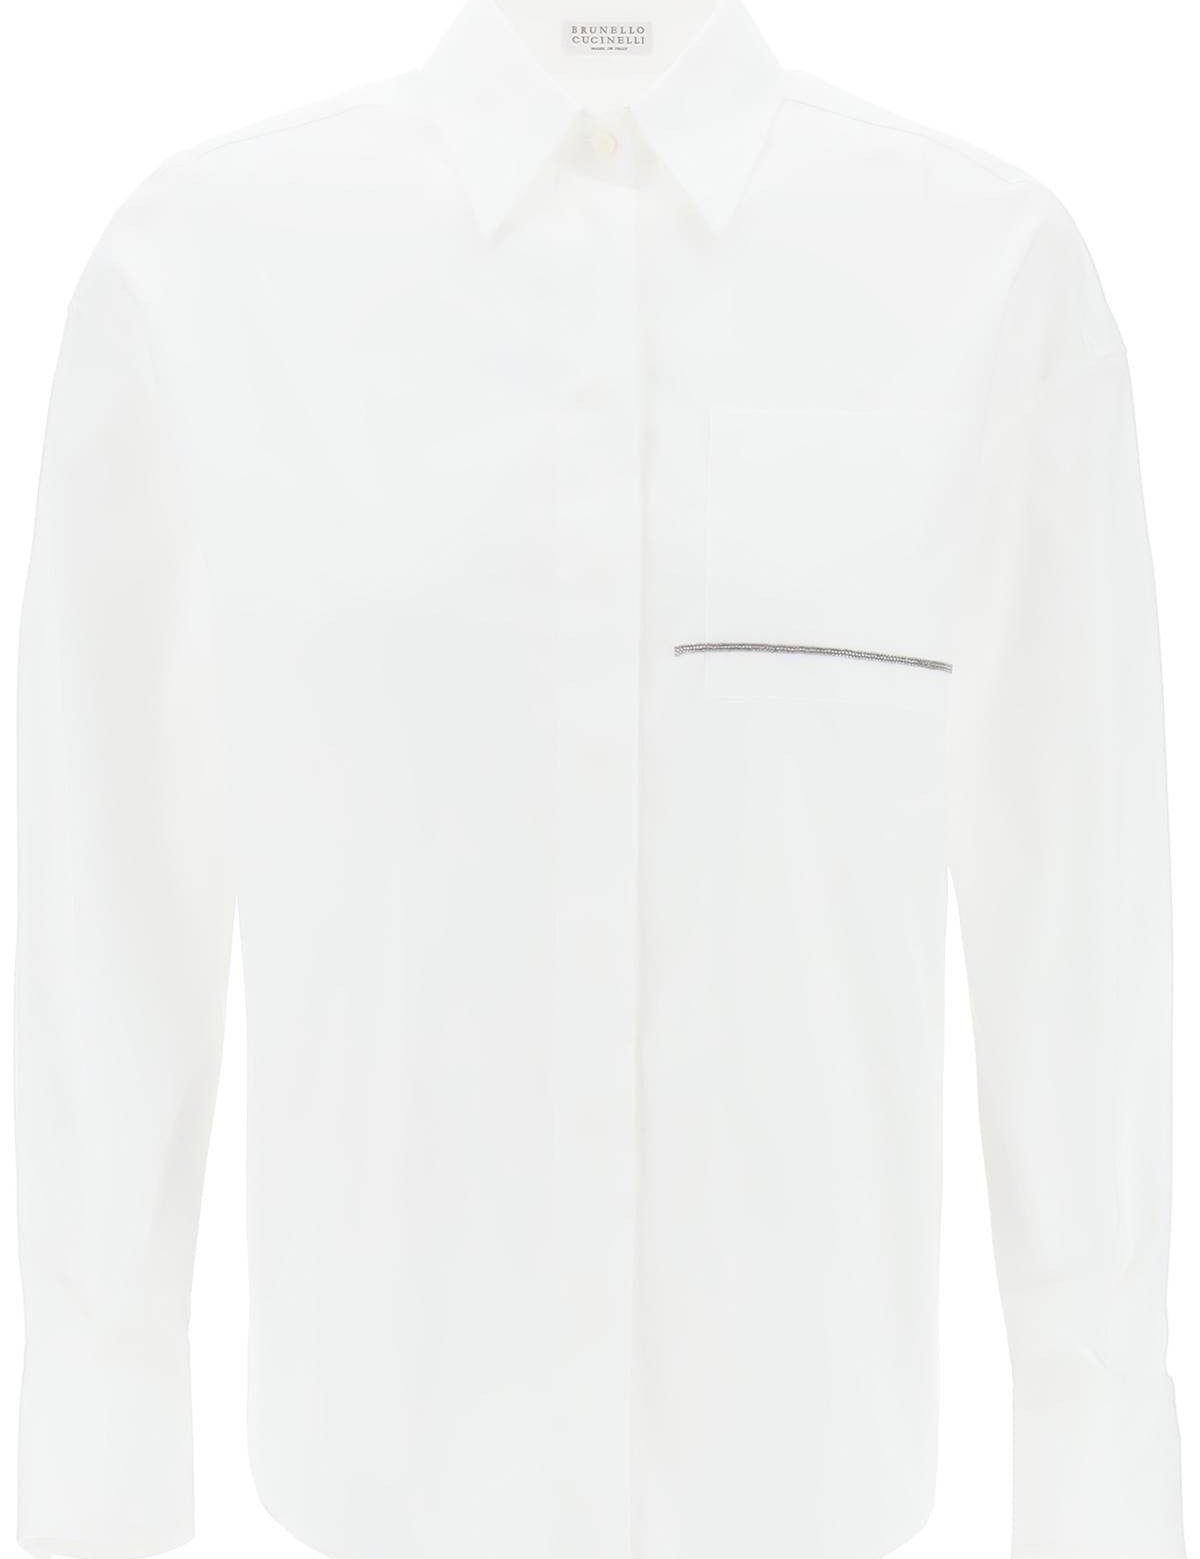 brunello-cucinelli-shirt-with-jewel-detail-on-the.jpg